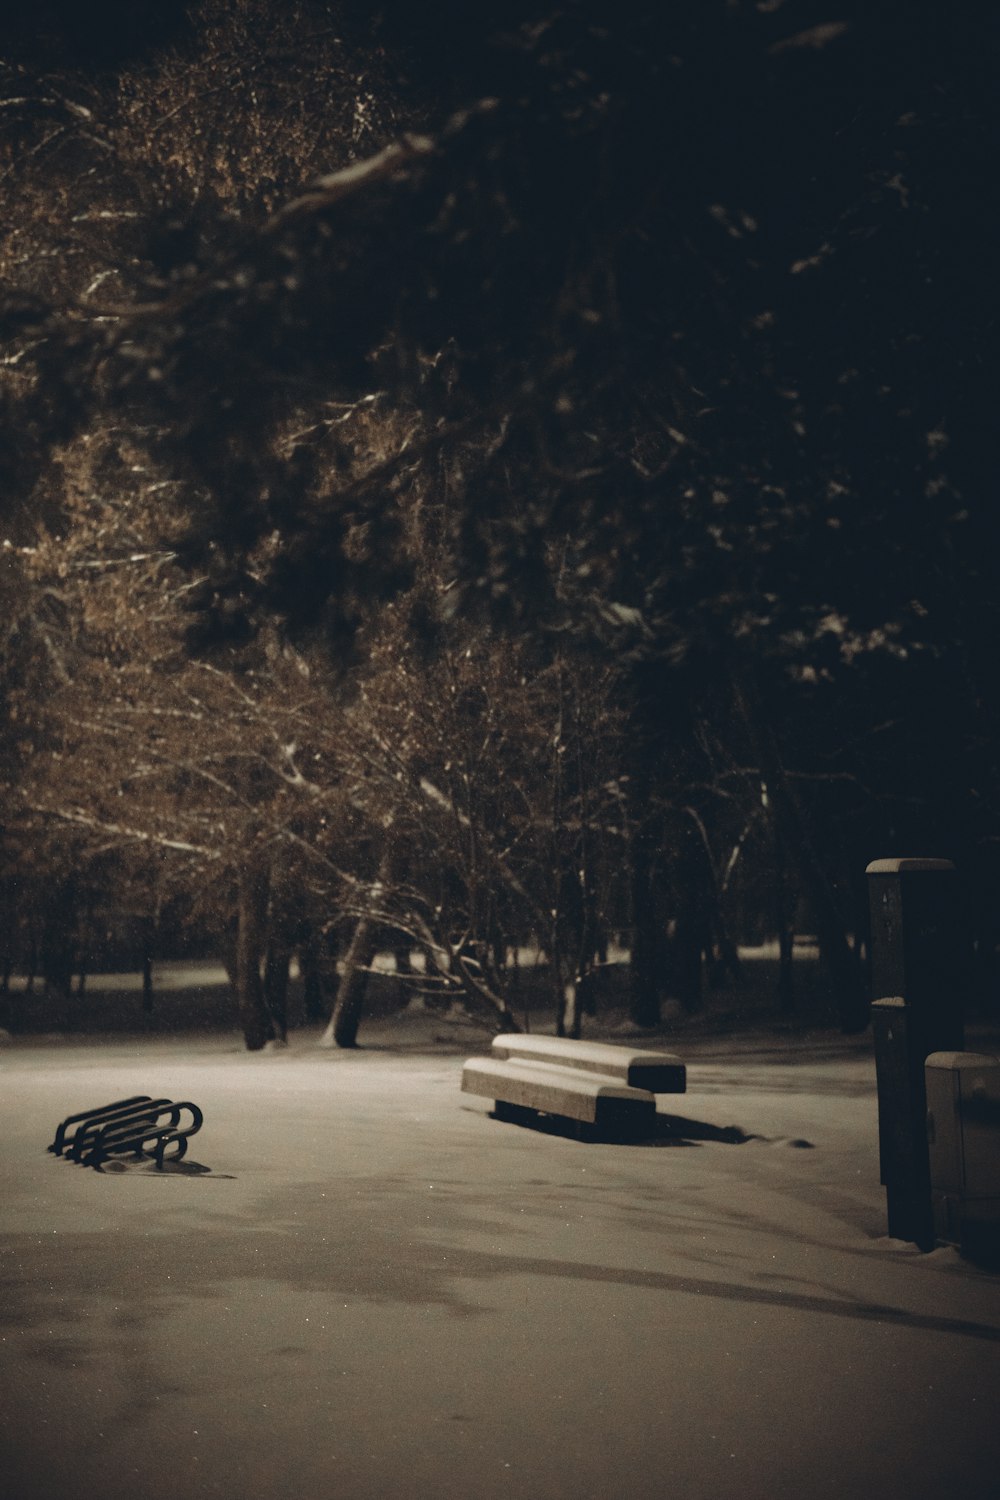 a park bench sitting in the middle of a snow covered park